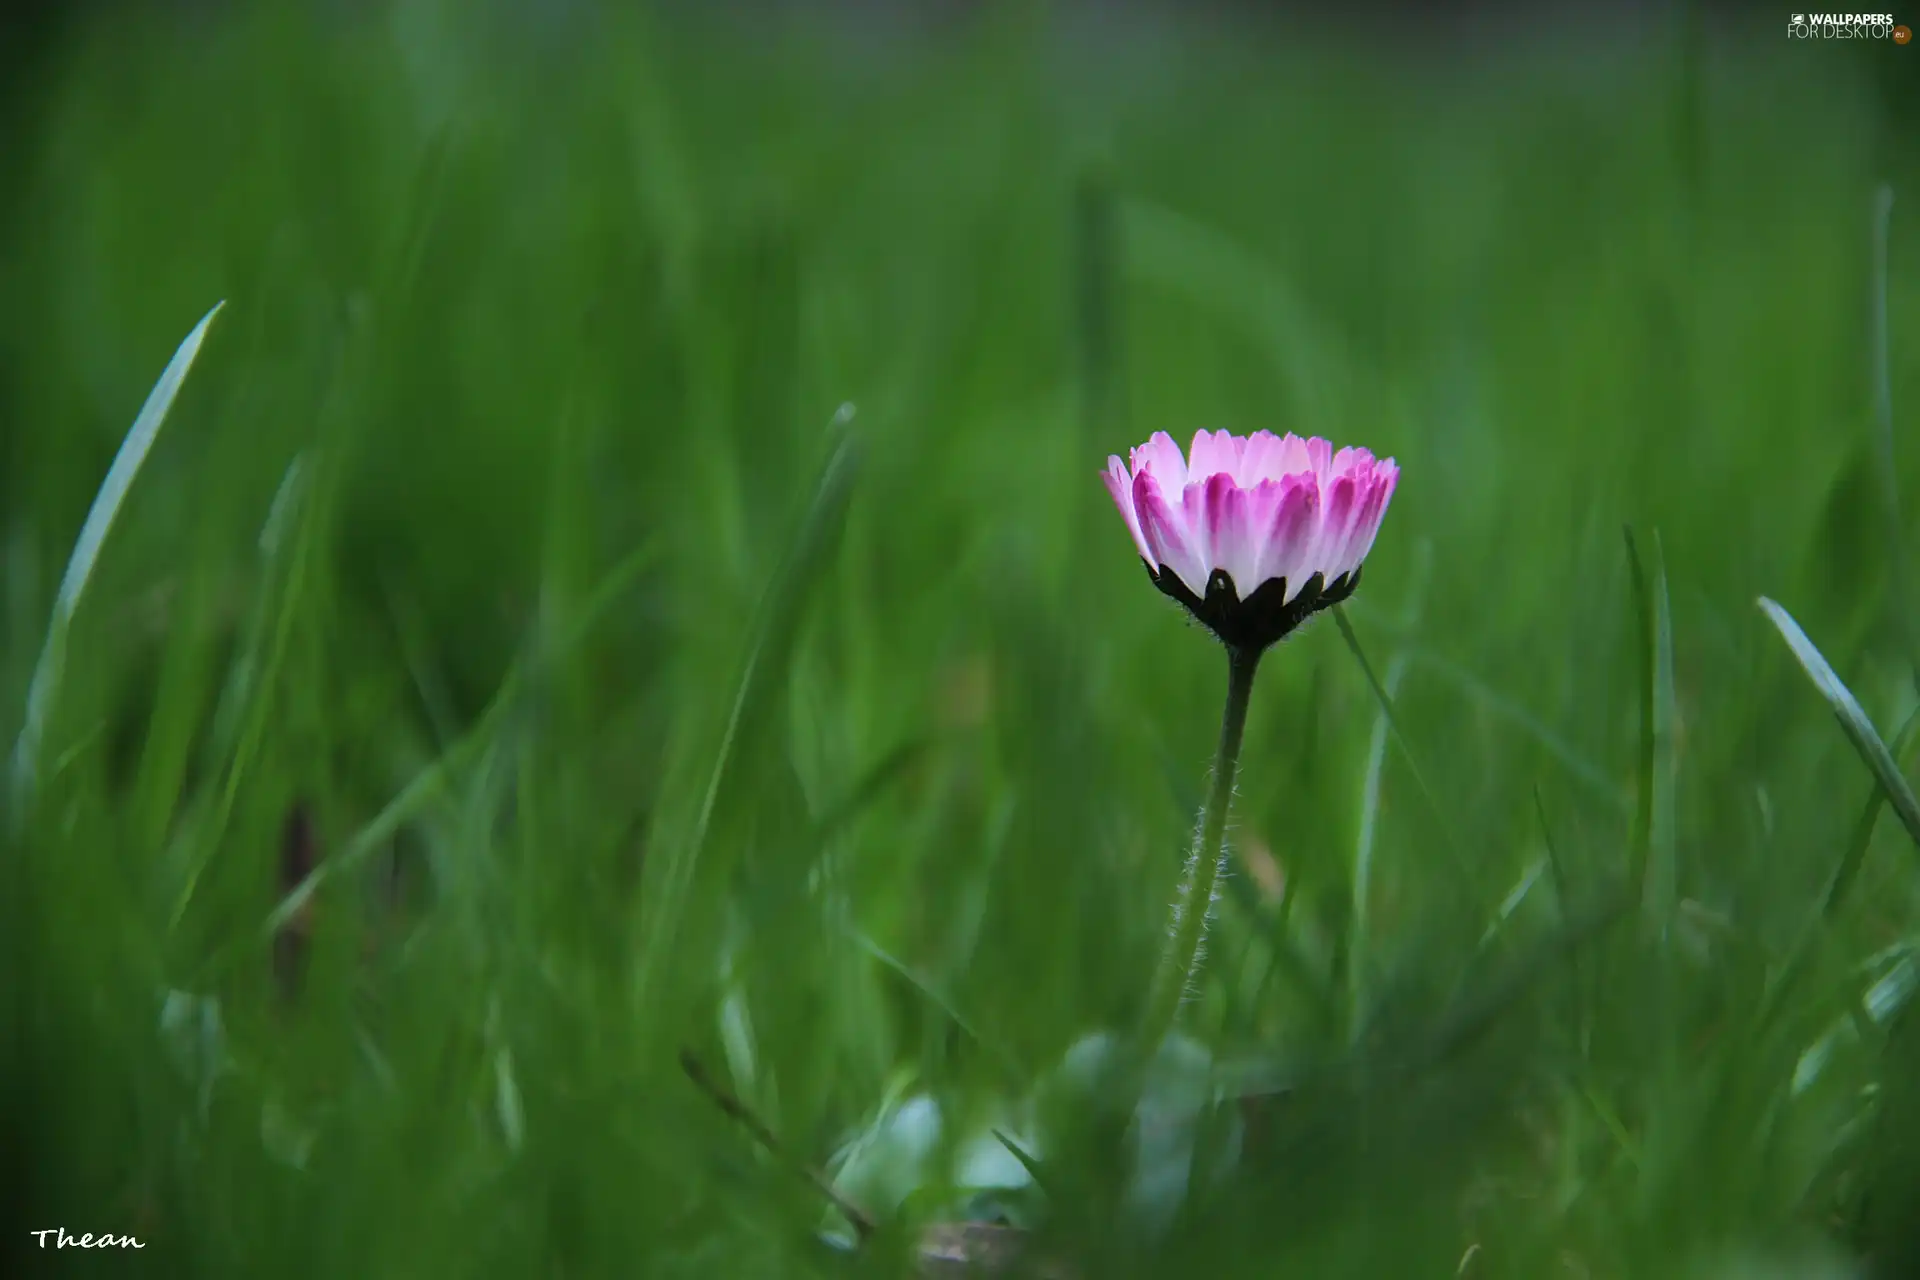 daisy, flakes, grass, Pink